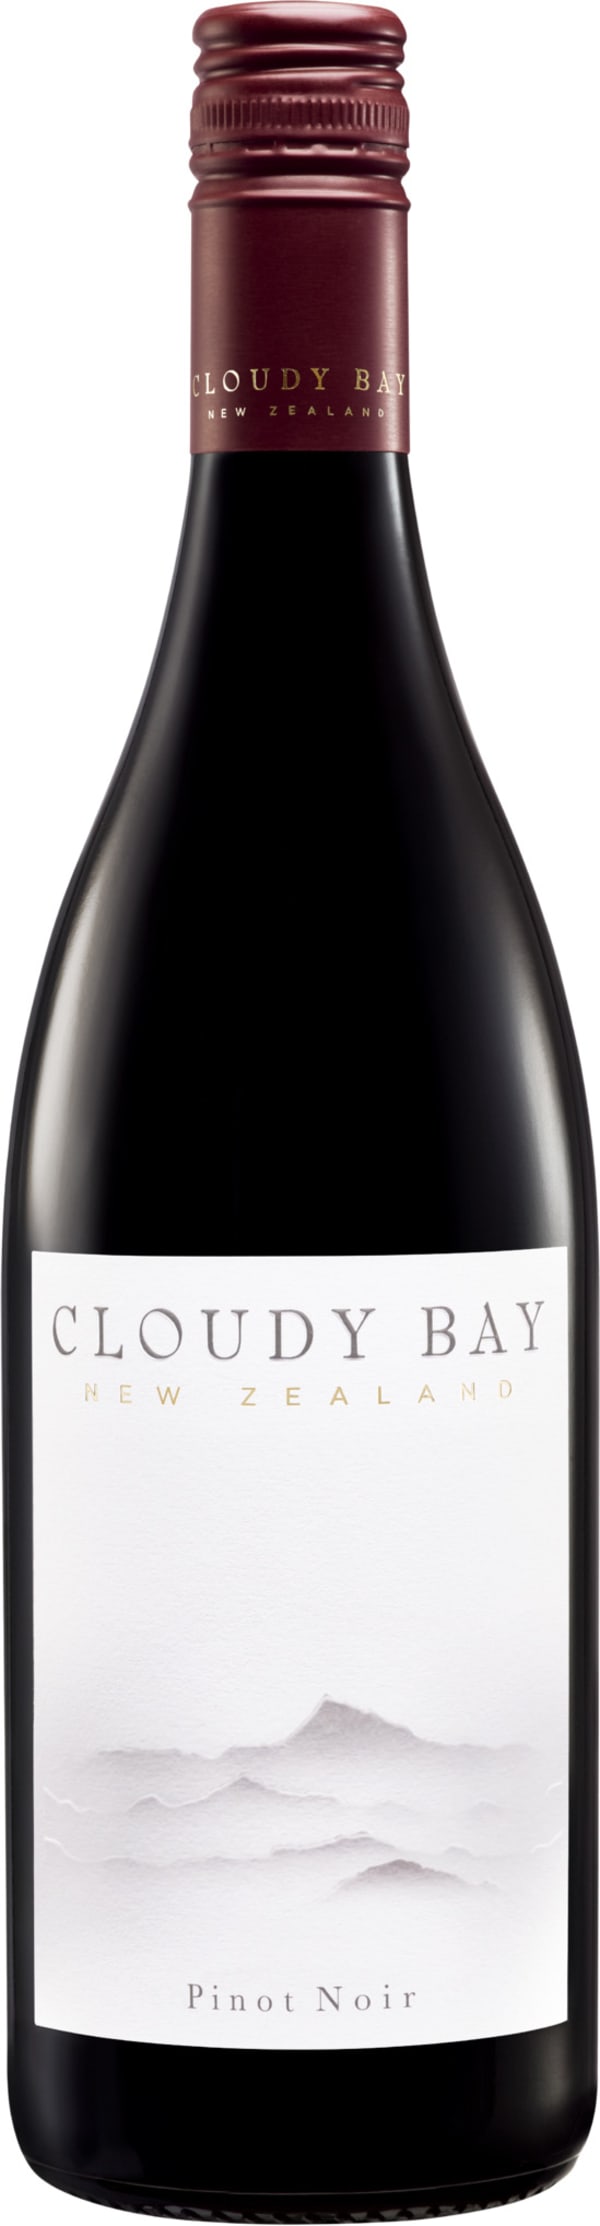 Cloudy Bay Pinot Noir - 2015 - 750ml – Wine's Link Limited